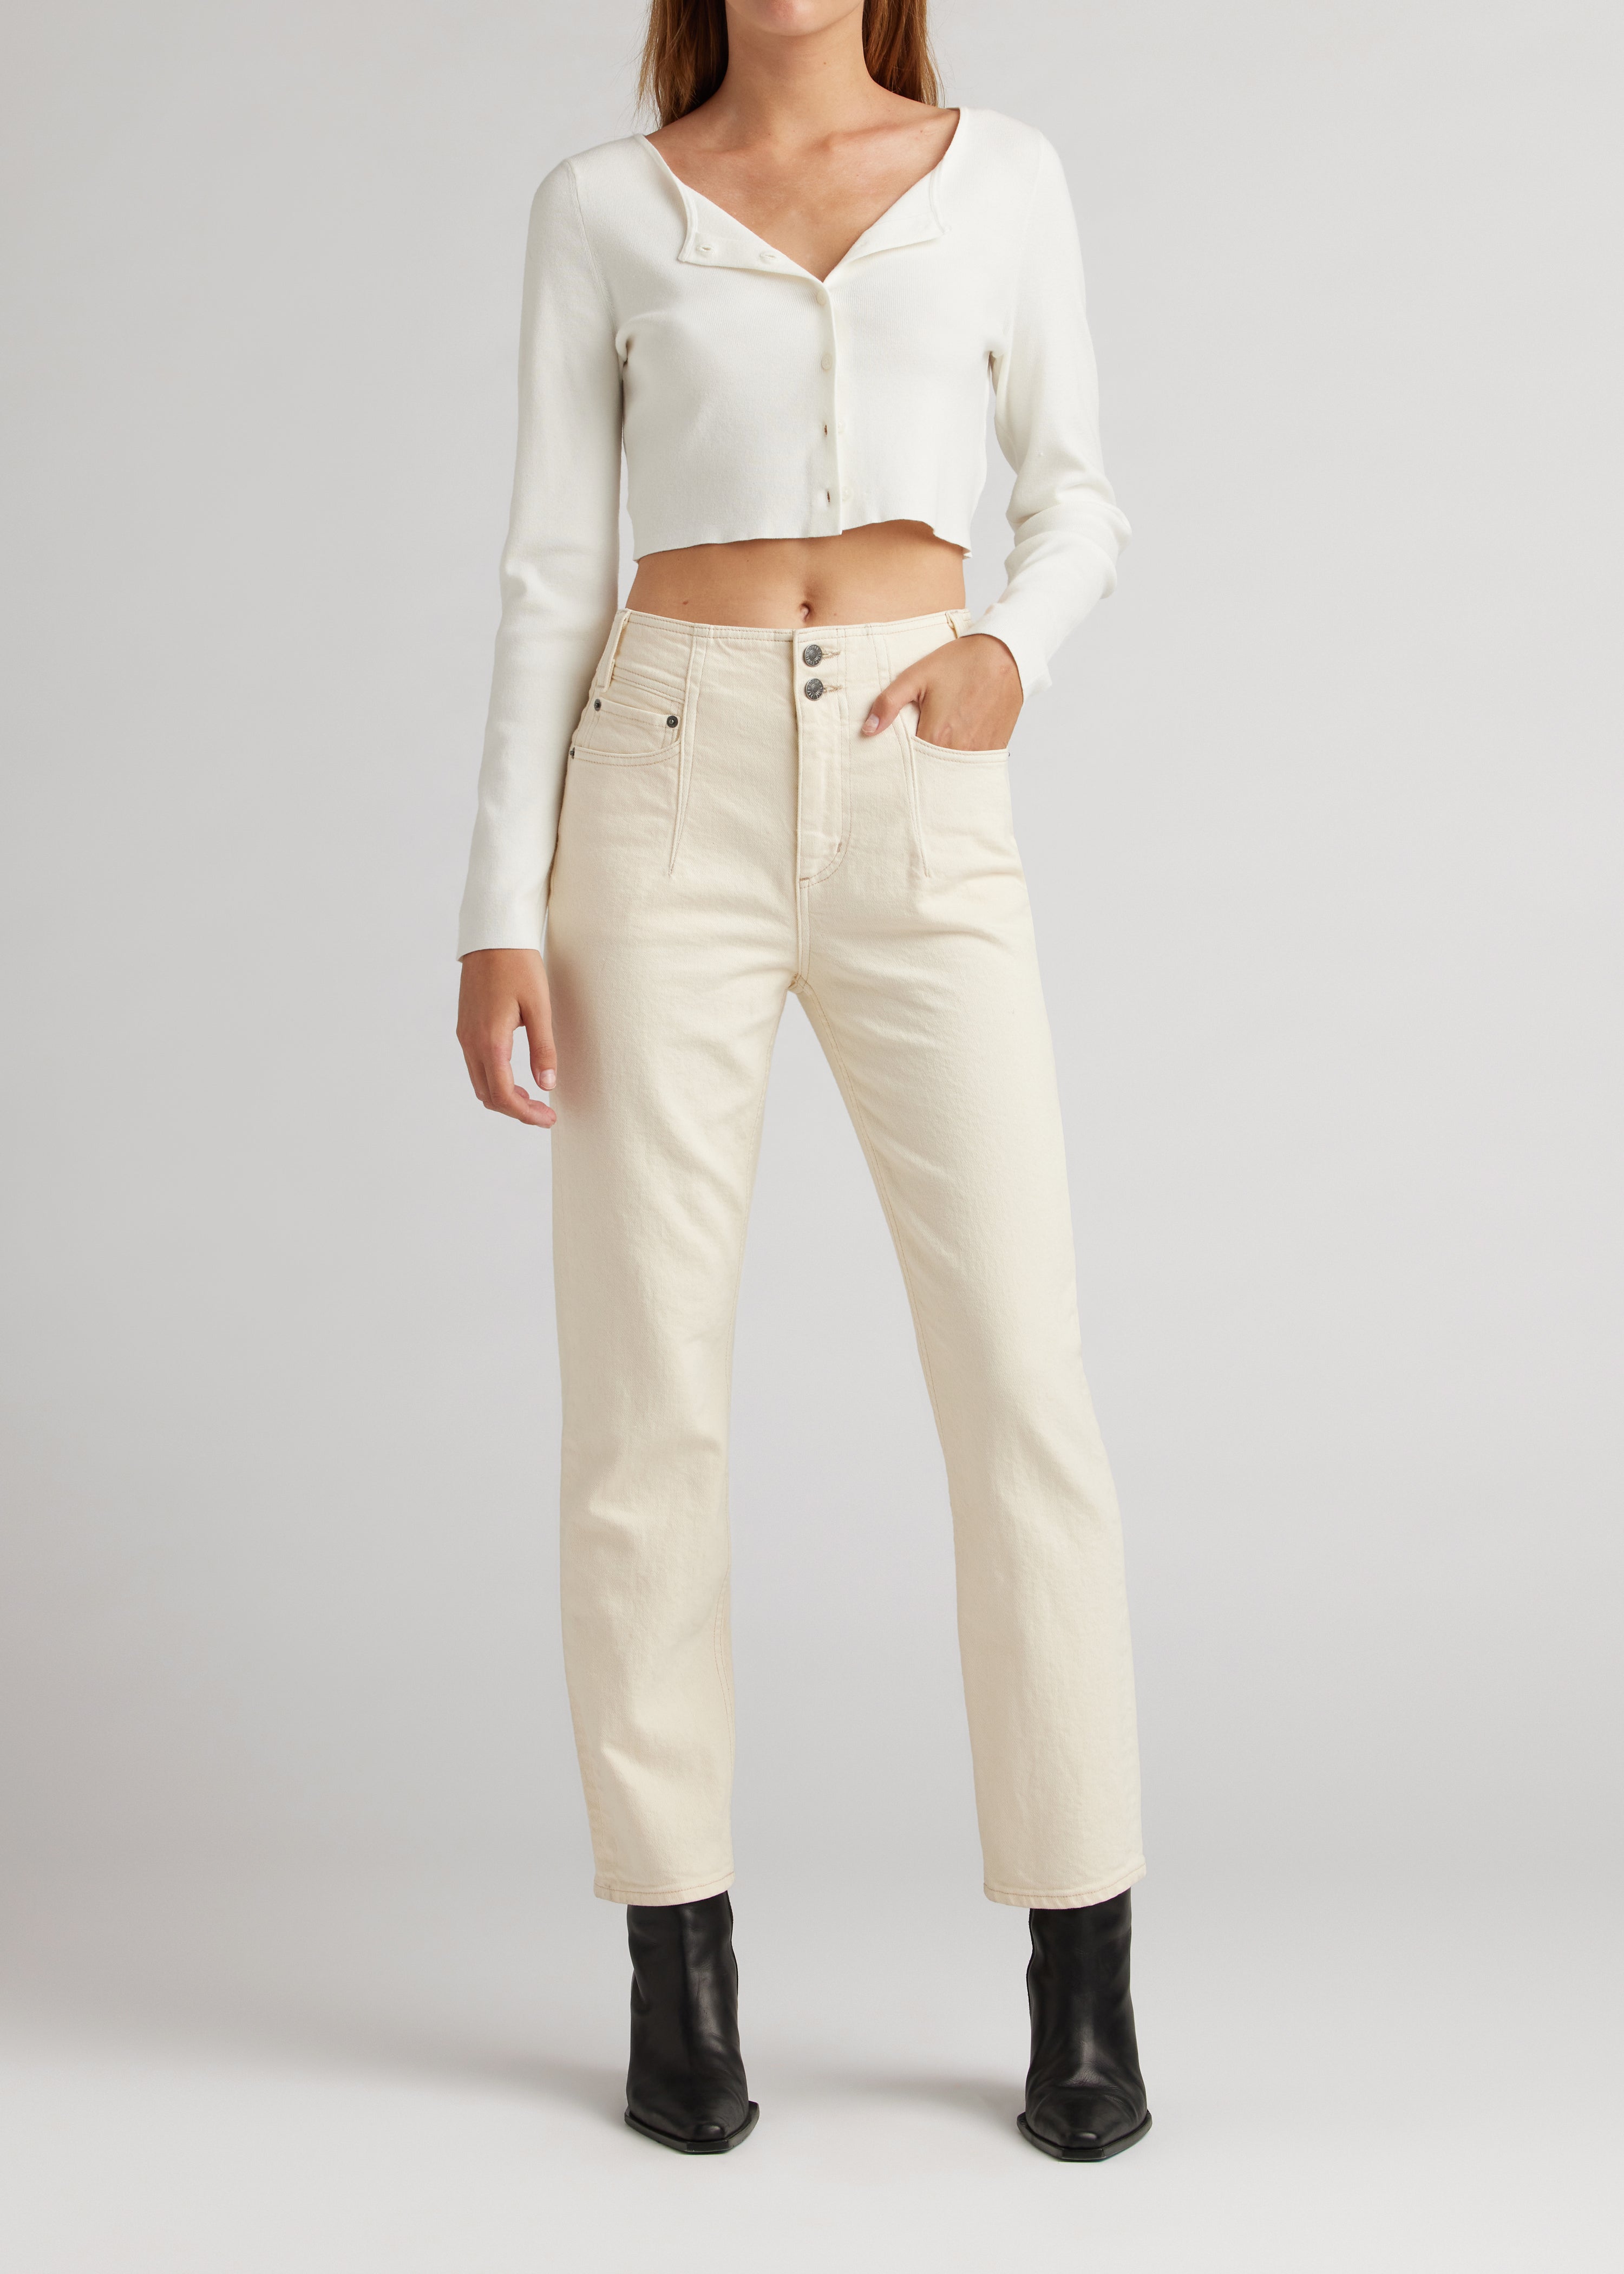 Frankie High Rise Relaxed Jean in alabaster